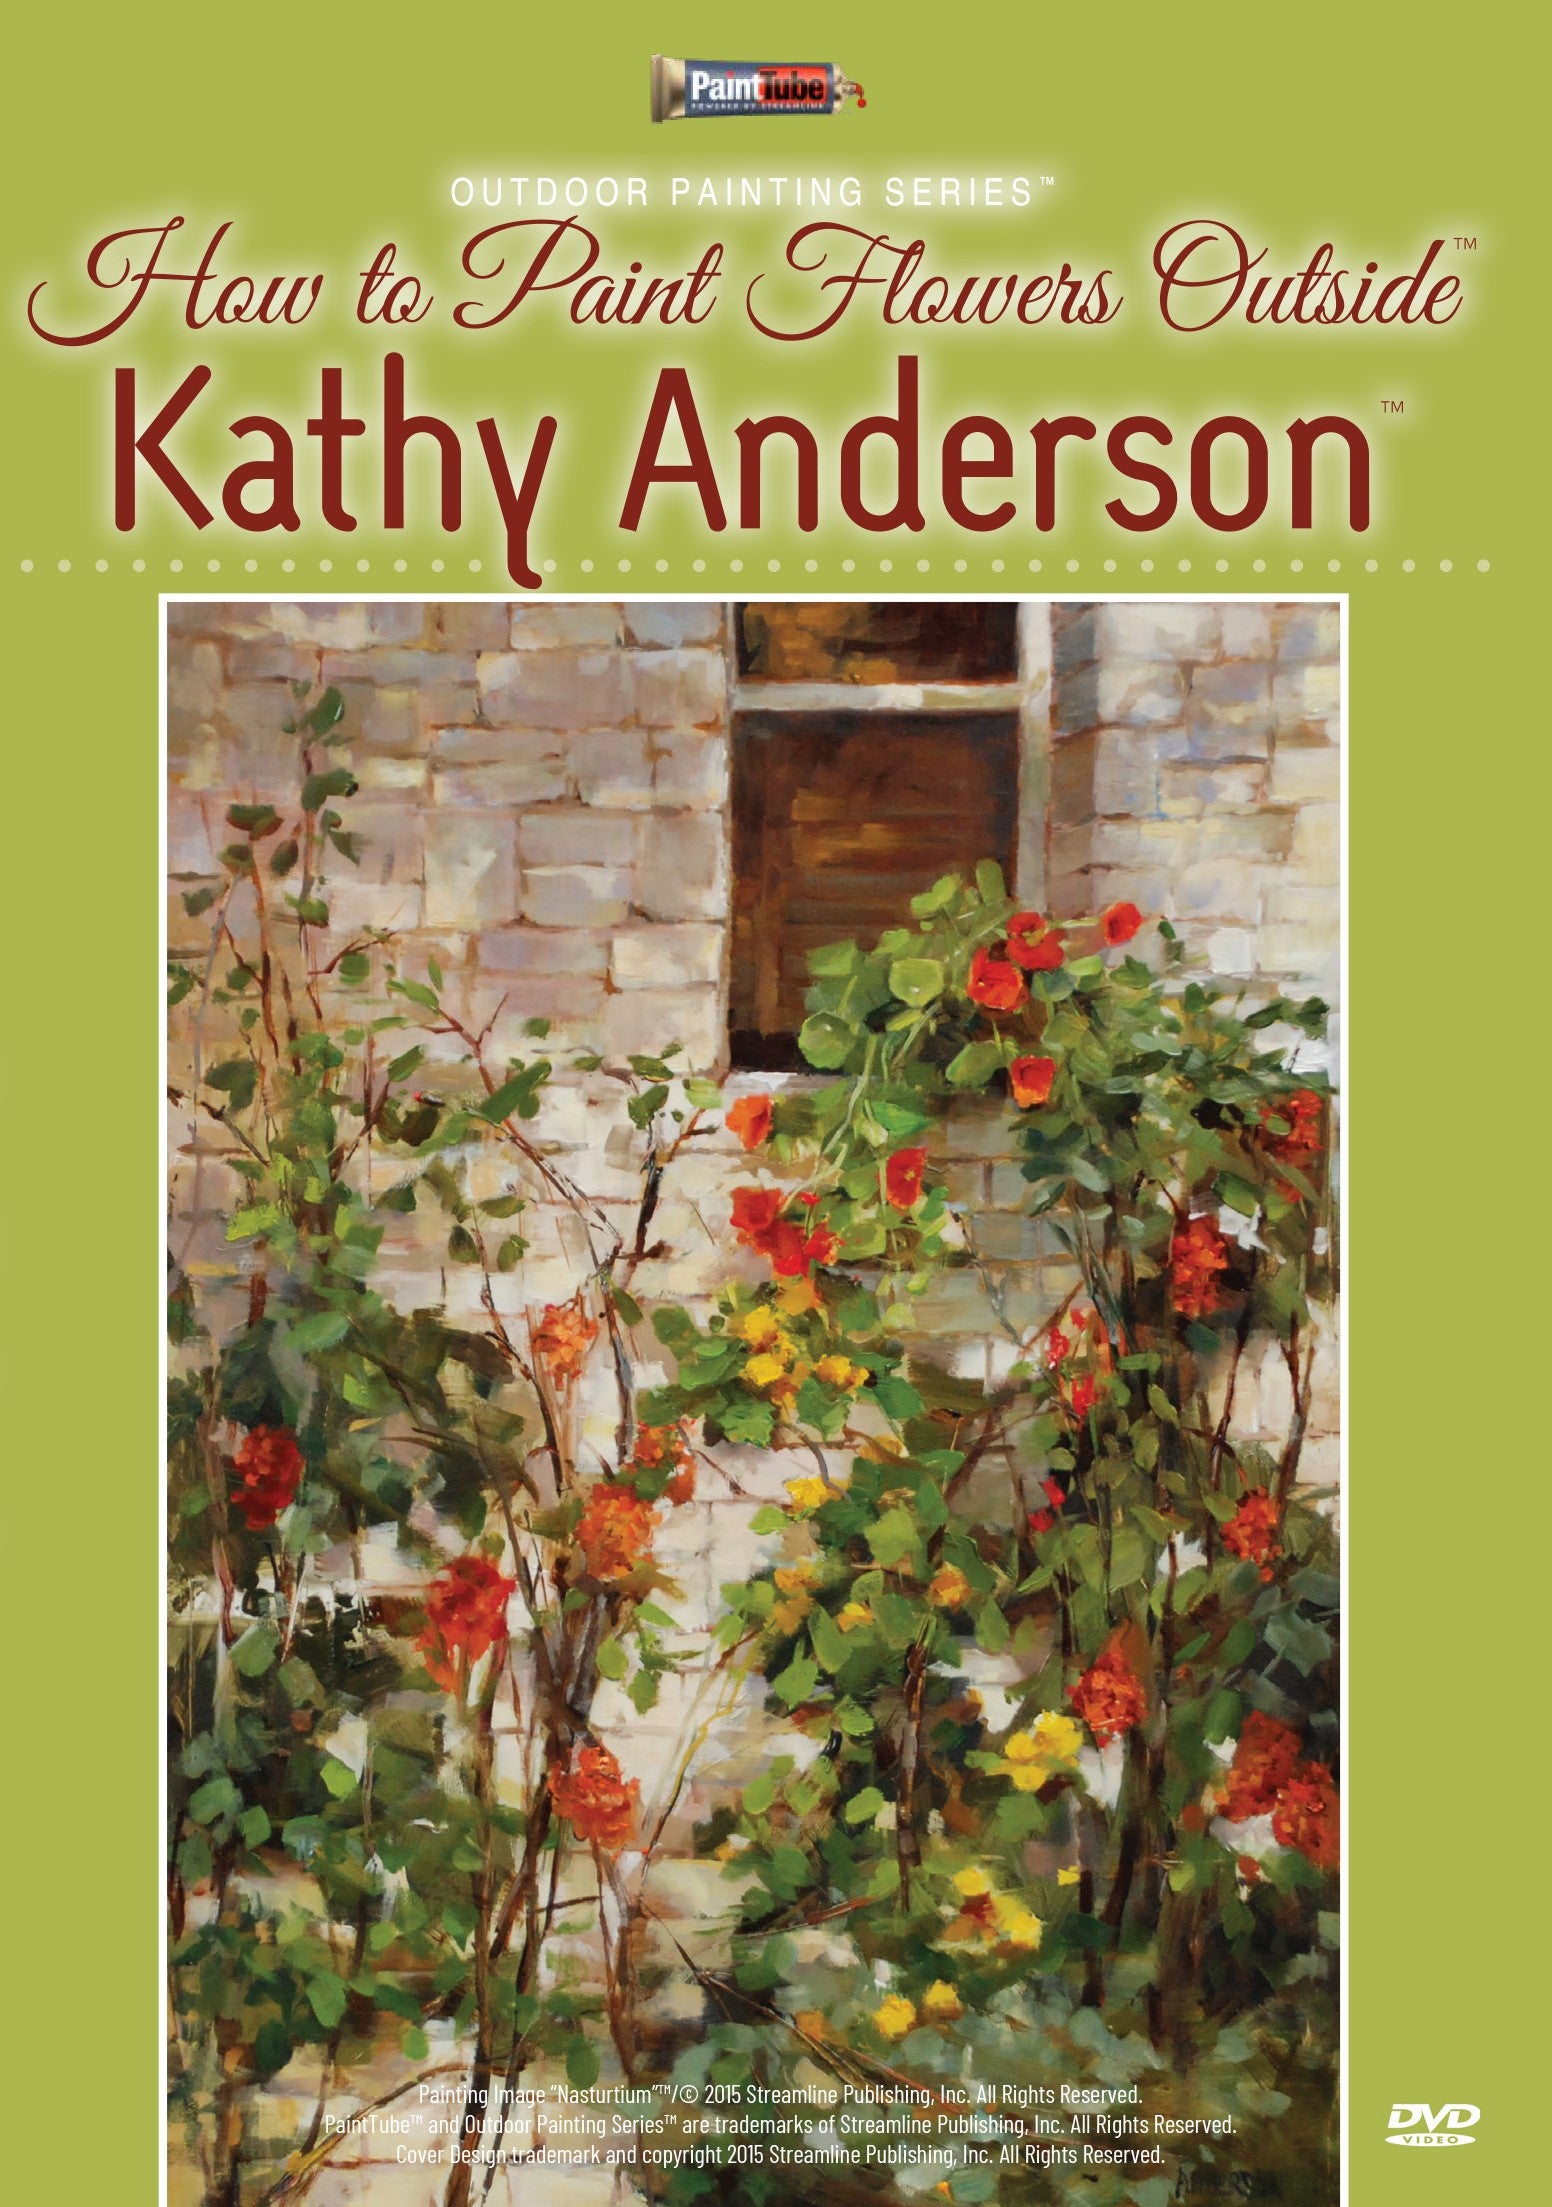 Kathy Anderson: How to Paint Flowers Outside